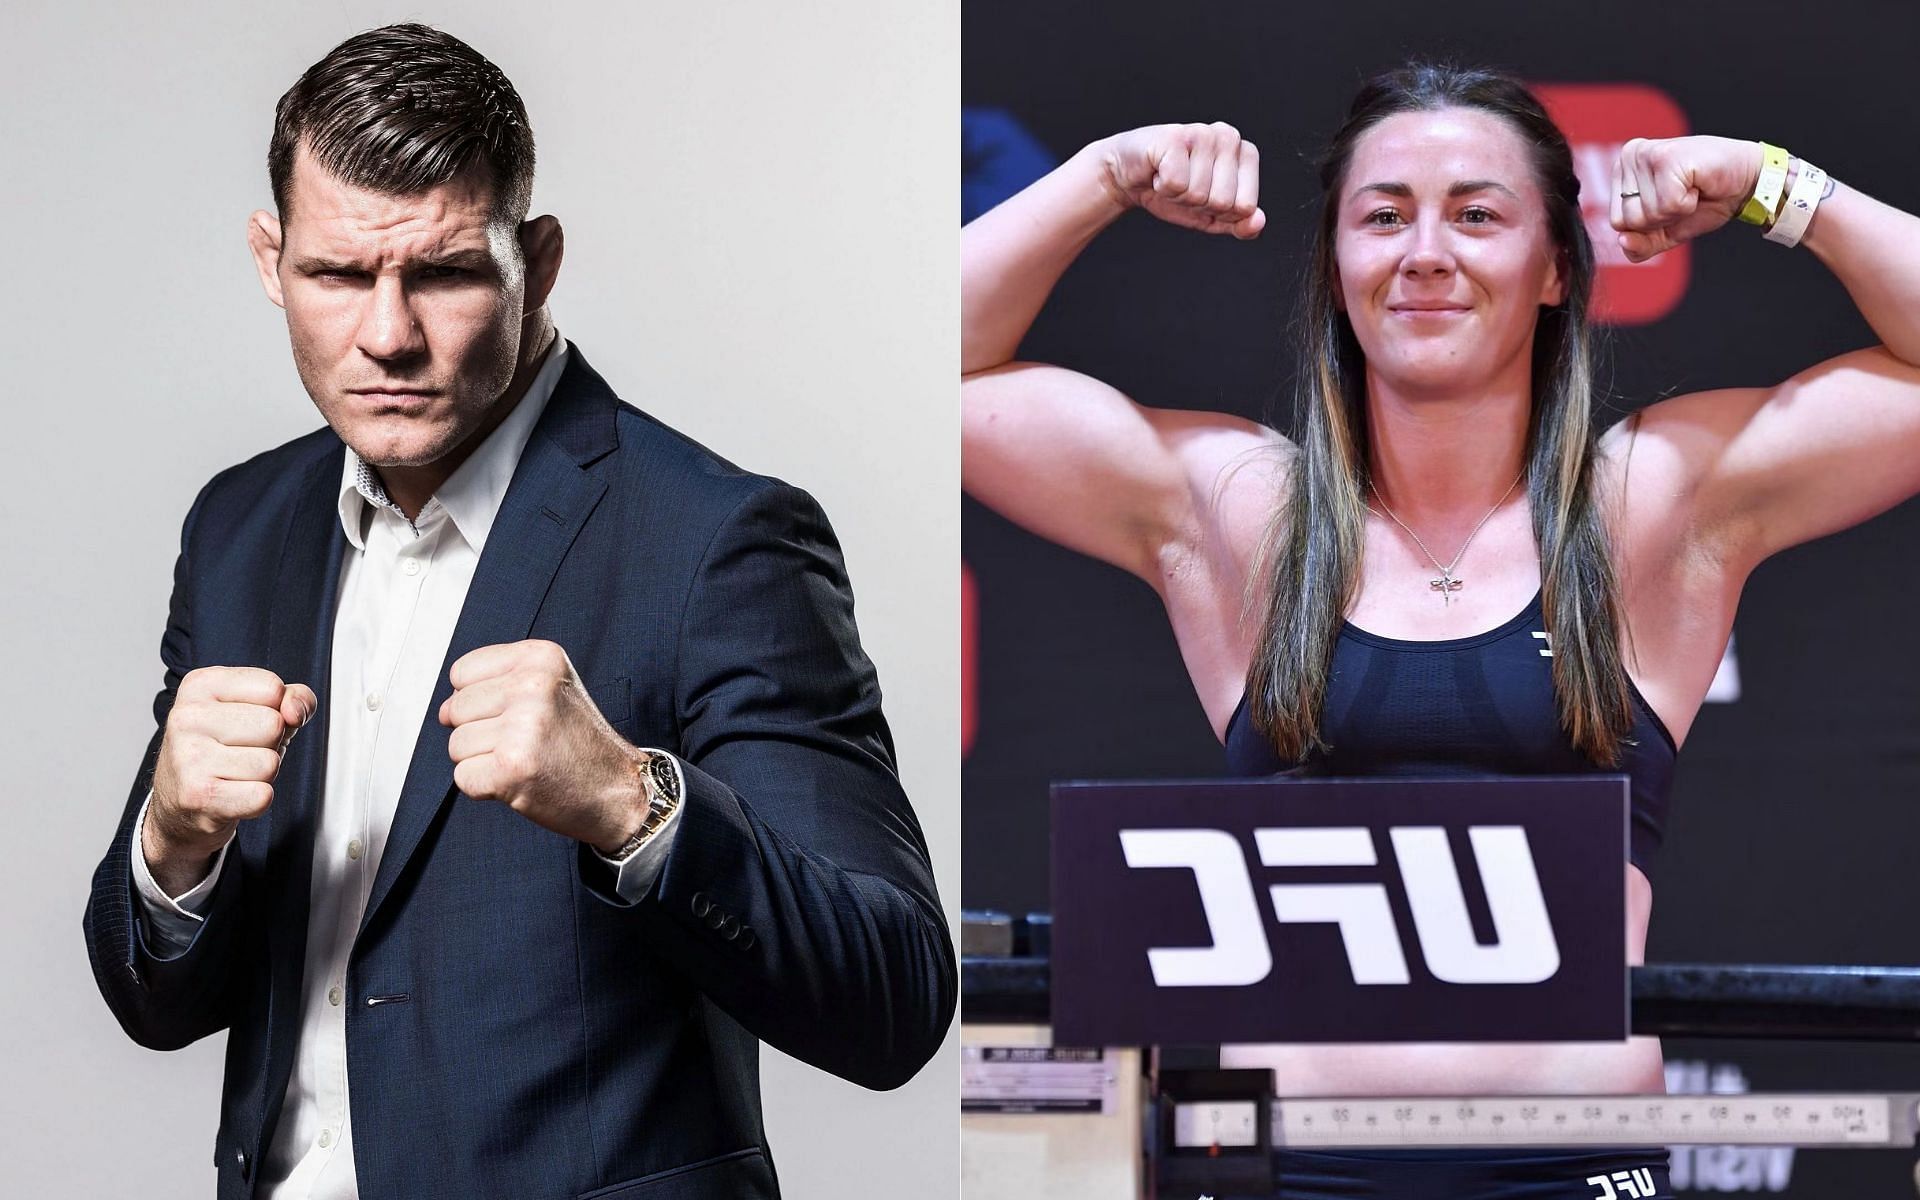 Michael Bisping (left) and Molly McCann (right)